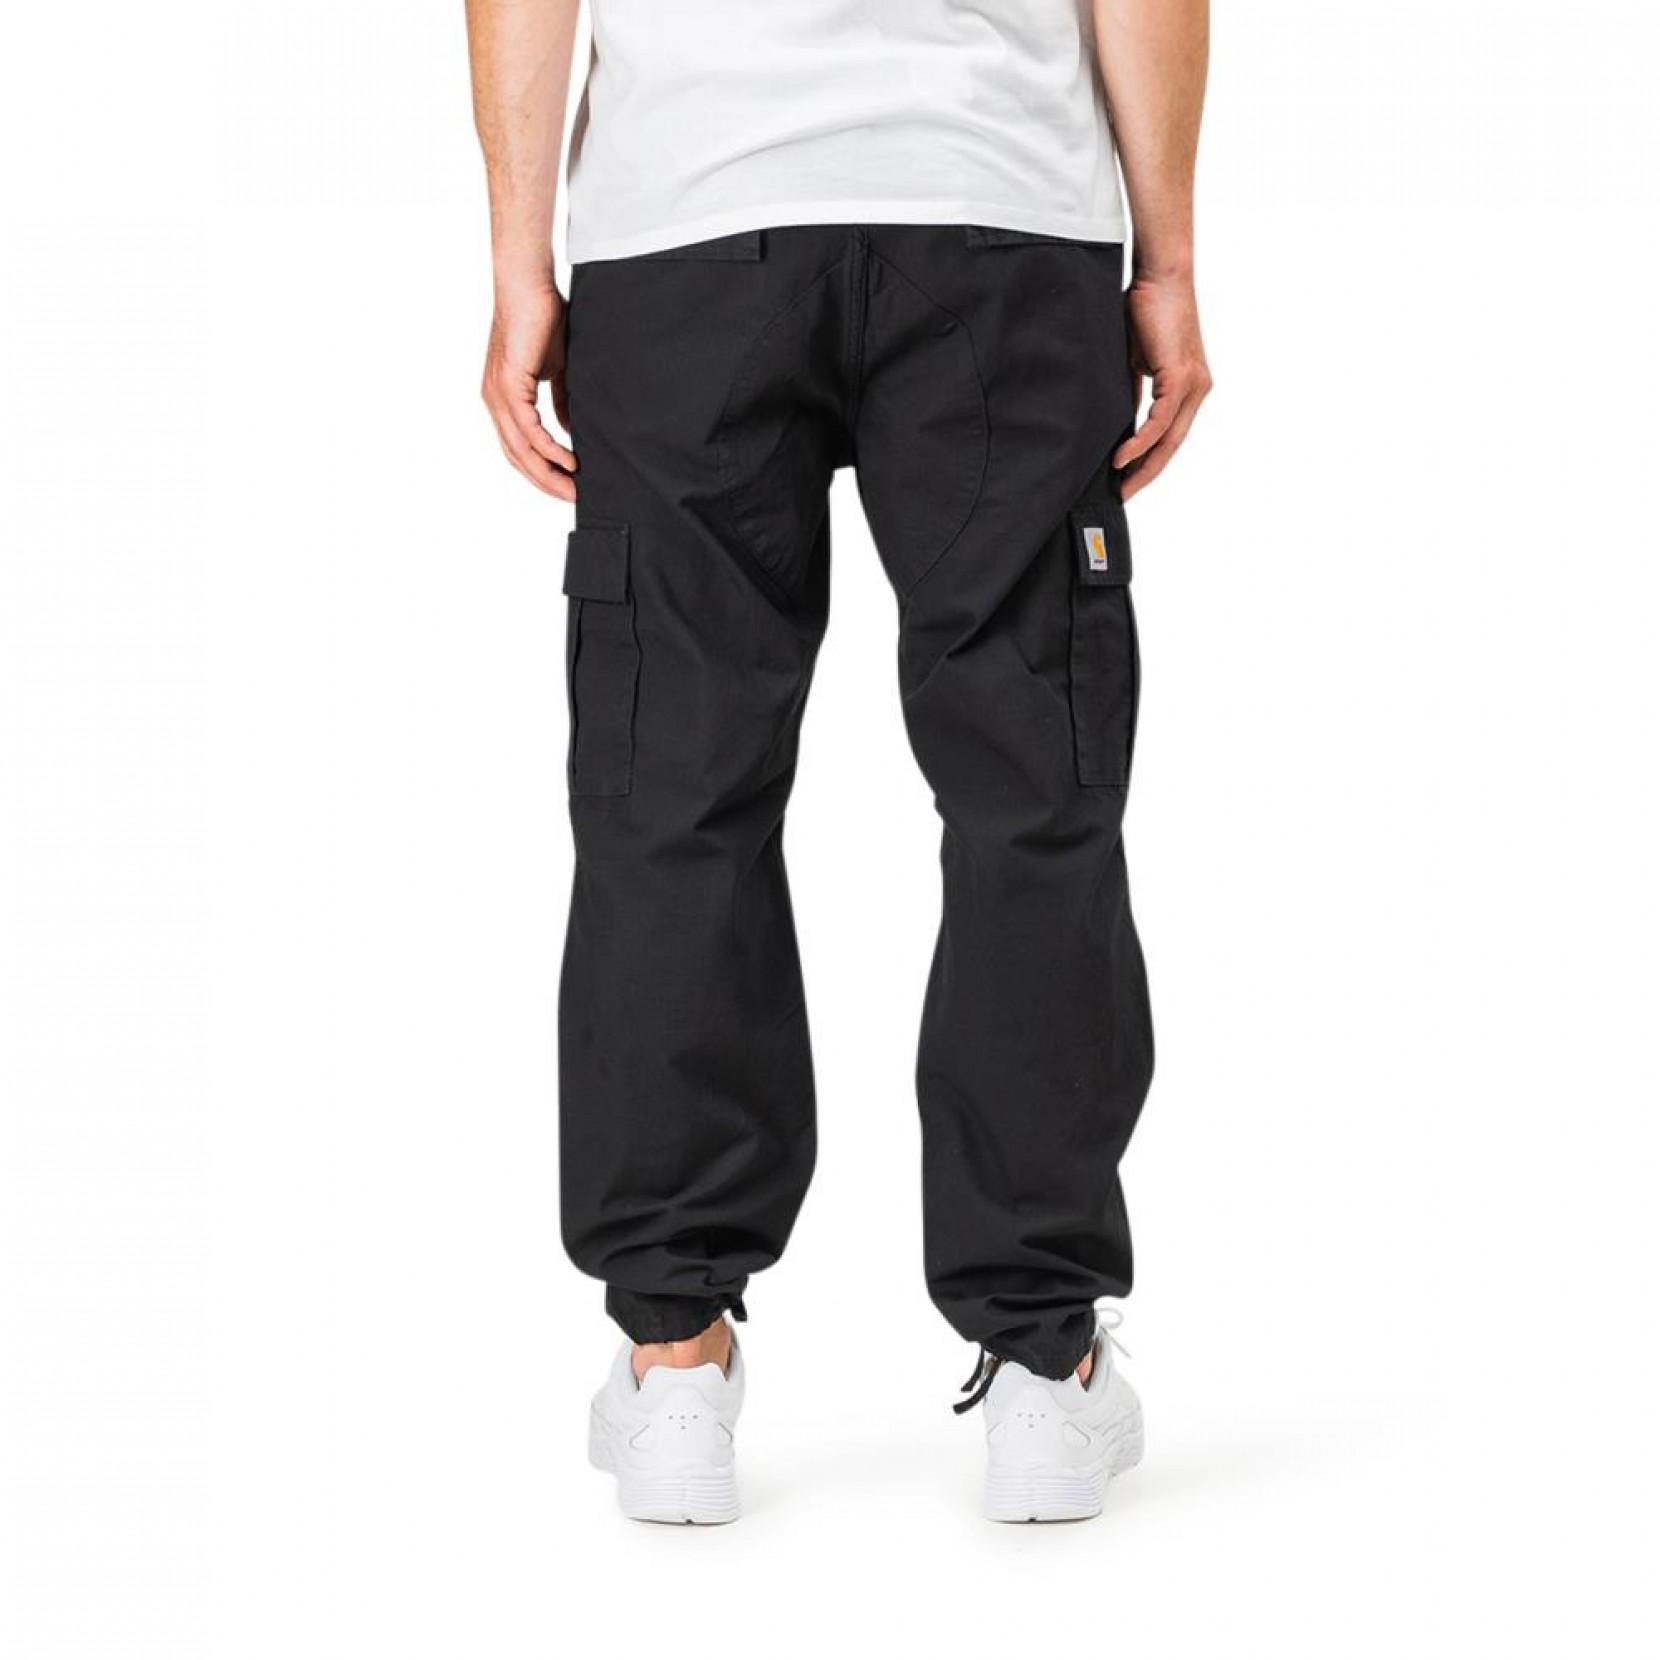 Carhartt WIP Cotton Aviation Pant in Black for Men - Lyst